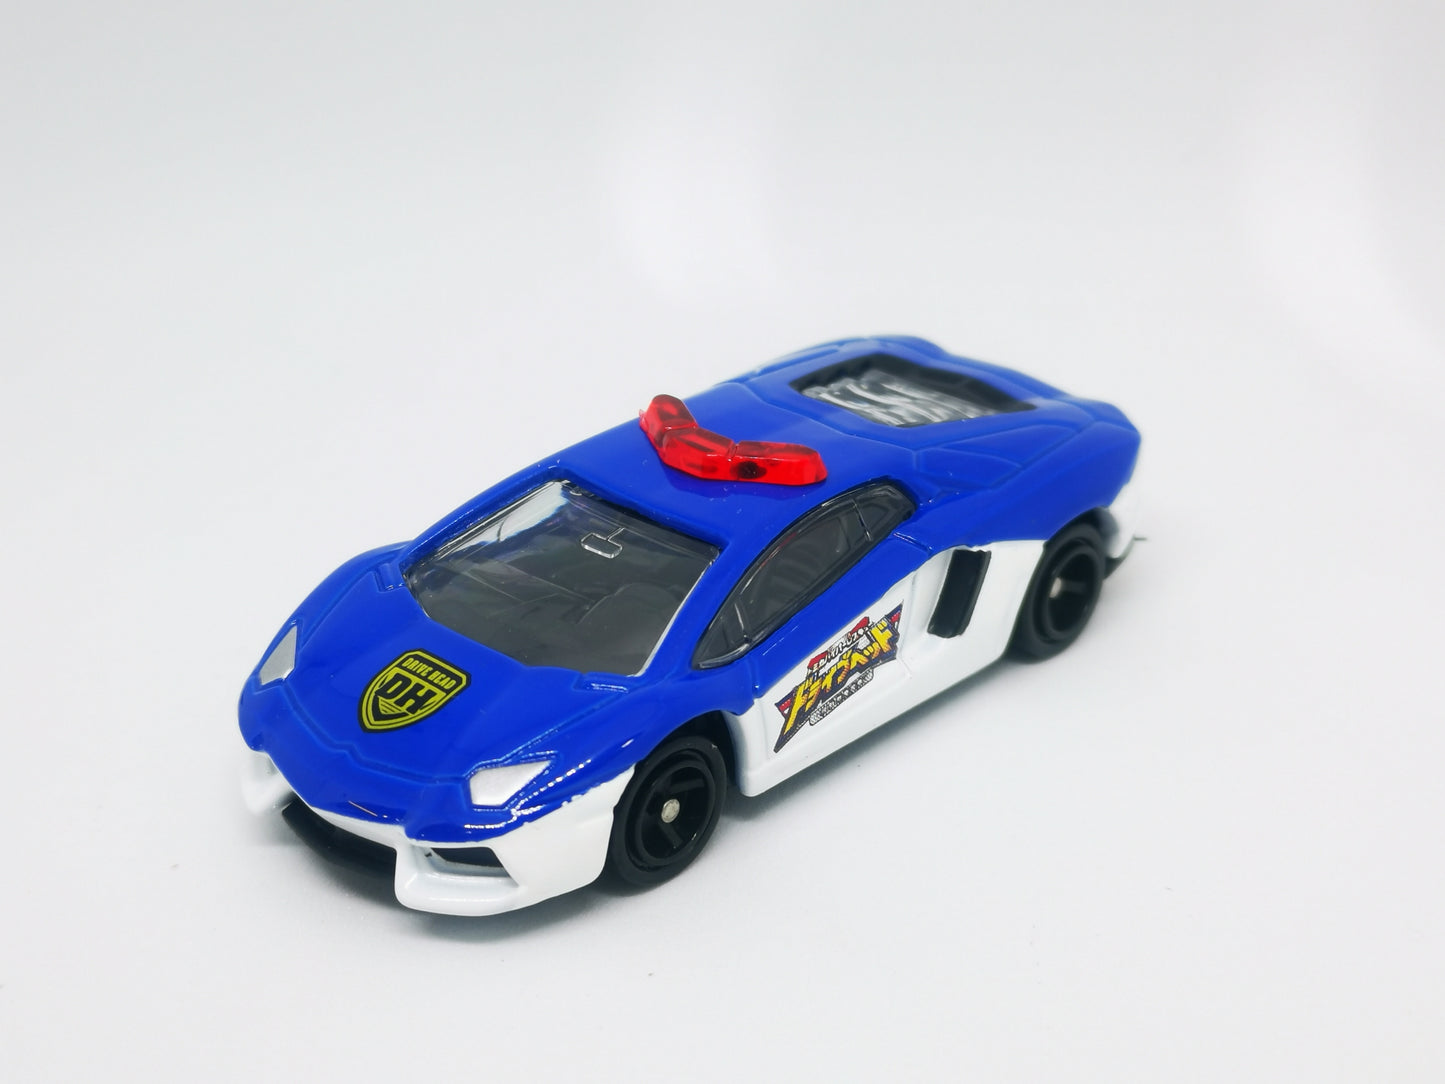 Tomica 2017 Annual Gift for Takara Tomy Stock Holders set of 2